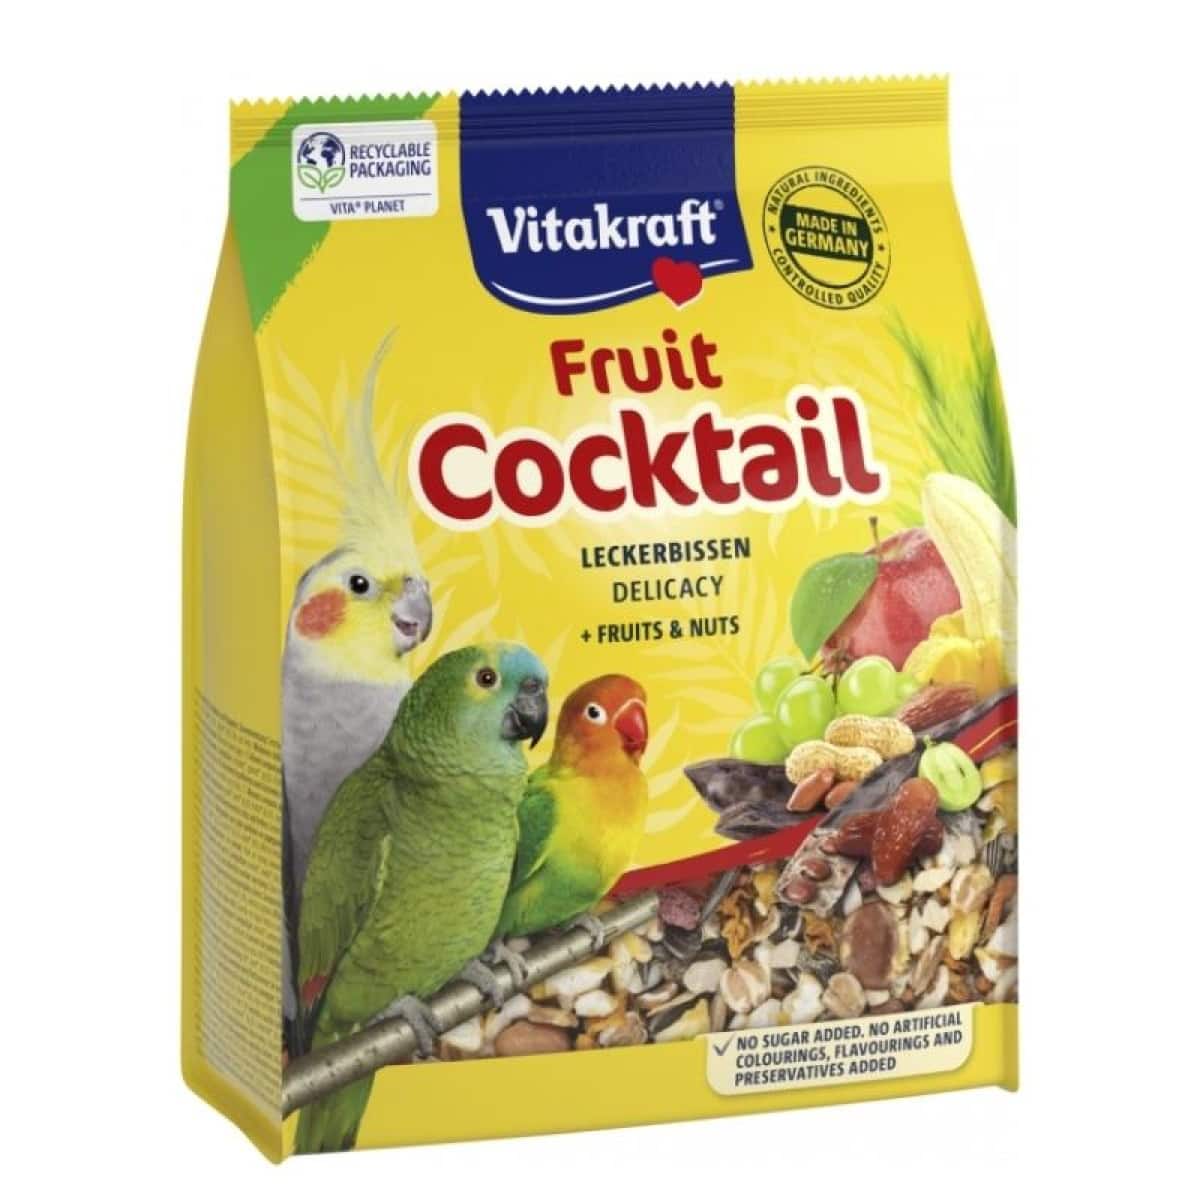 Vitakraft Fruit Cocktail with Fruits & Nuts 250g Main Image